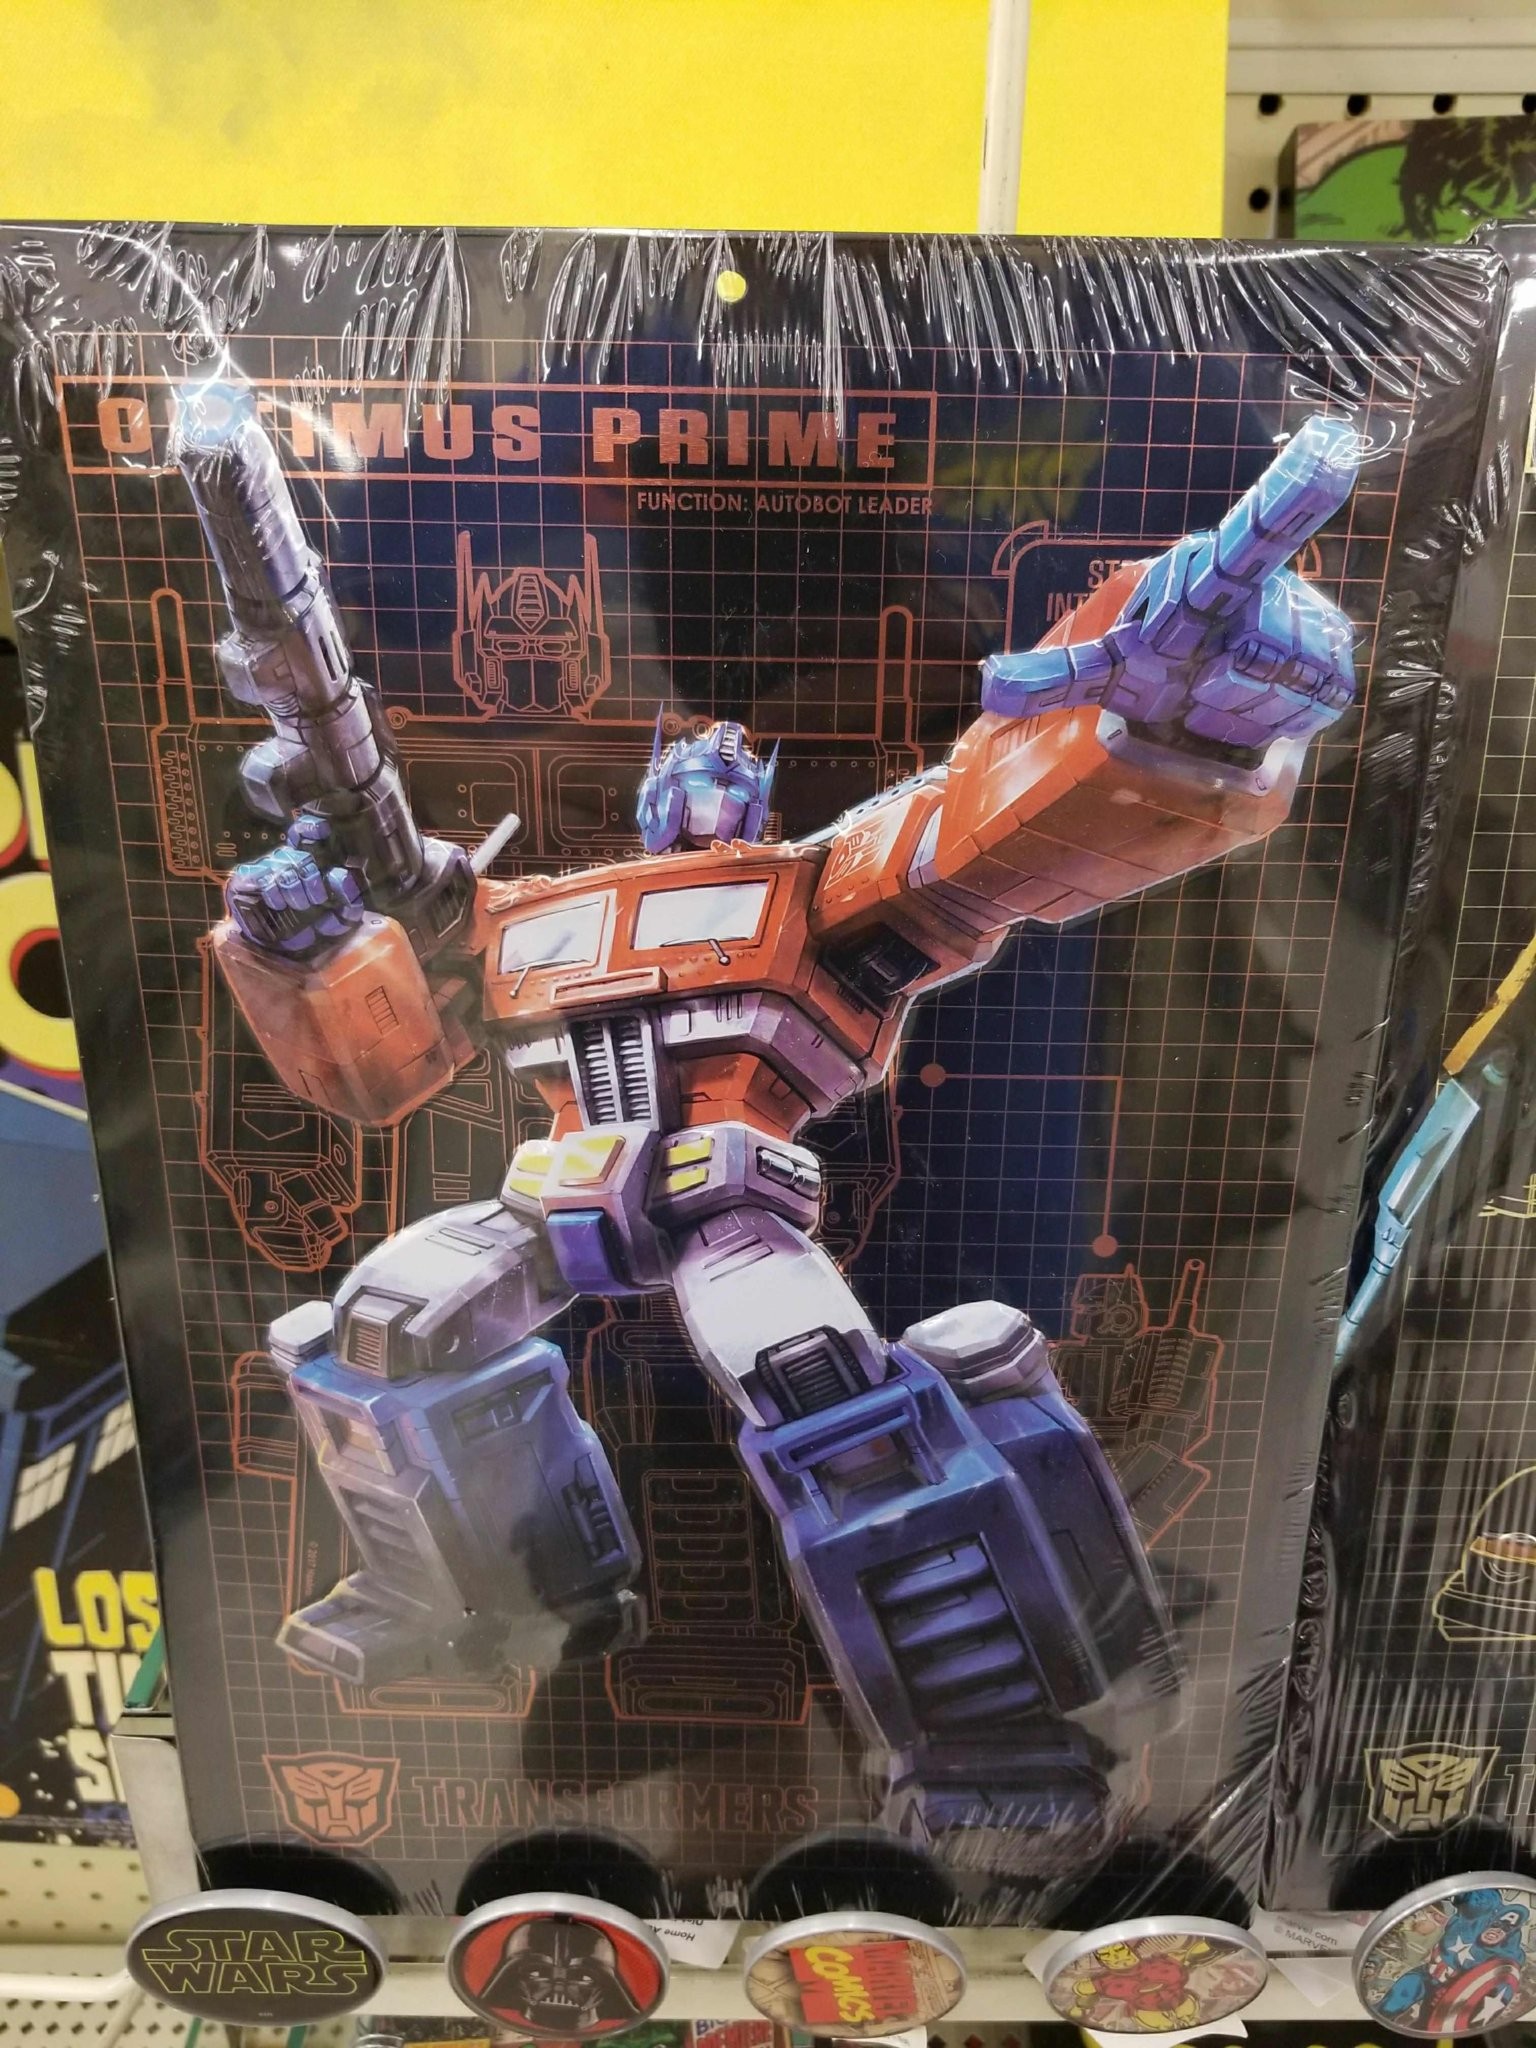 Transformers News: Transformers Embossed Tin Signs found at Hobby Lobby